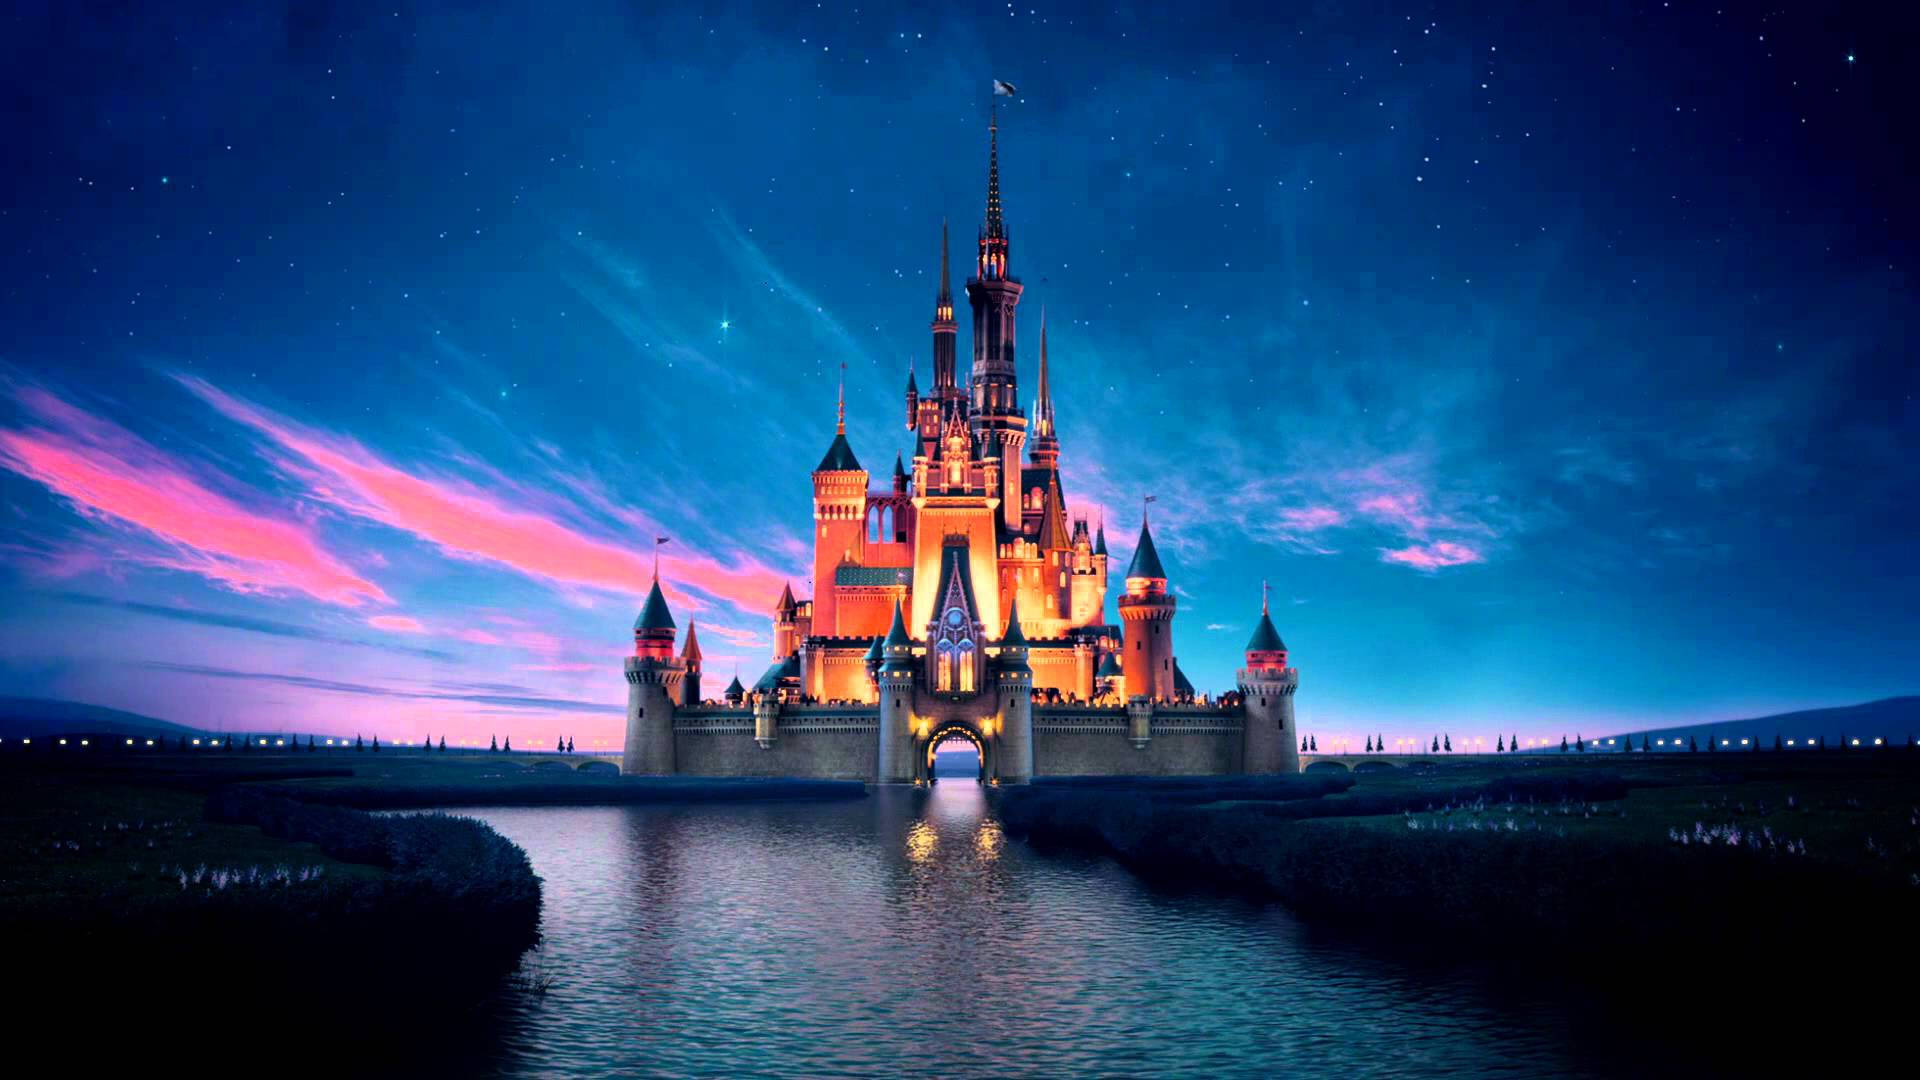 Visit the iconic Disney Castle and make magical memories! Wallpaper